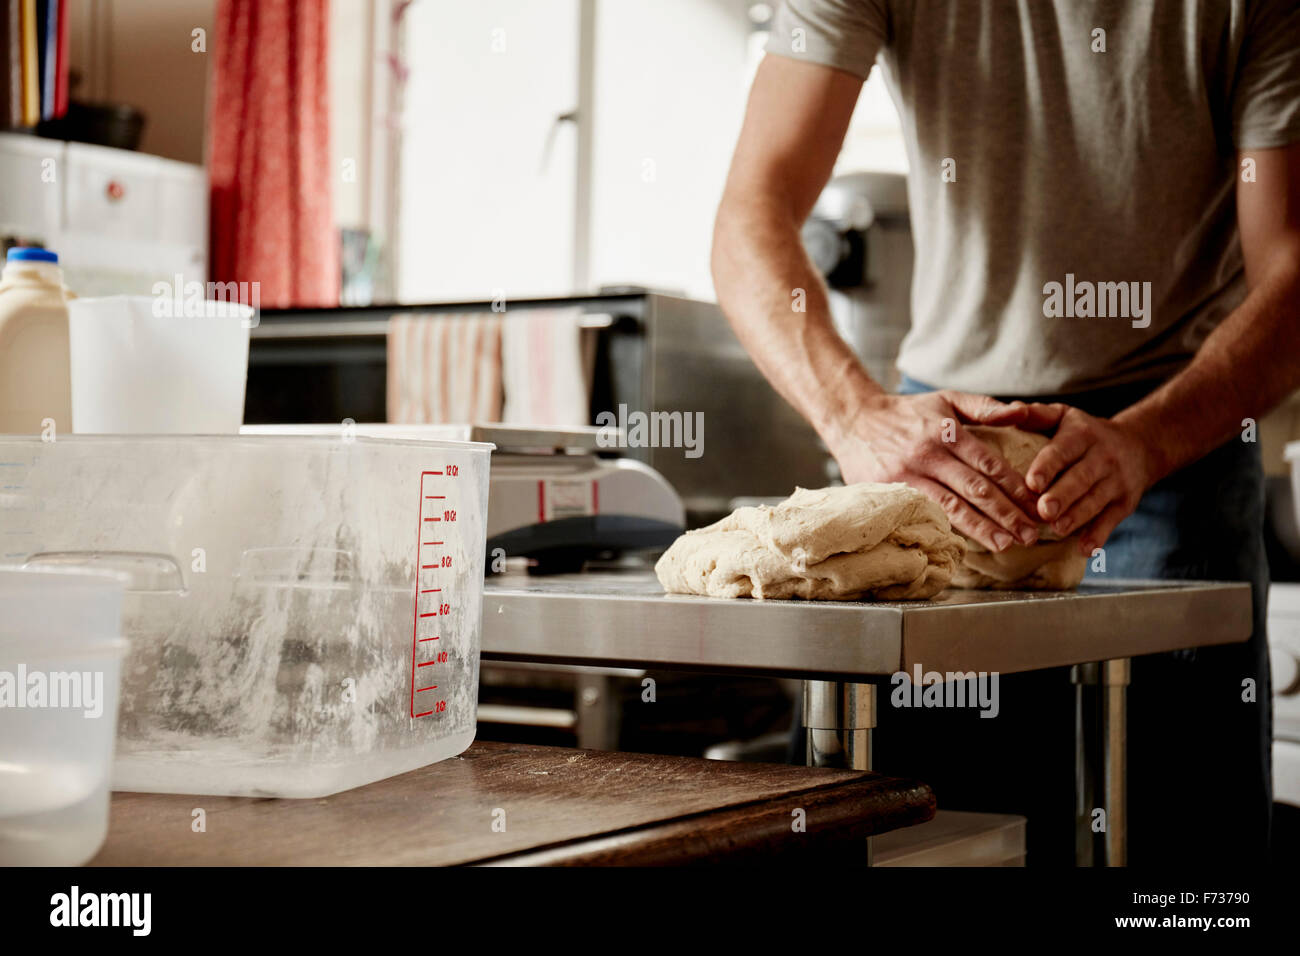 A man, a baker working in a commercial kitchen kneading a large piece of dough. Stock Photo